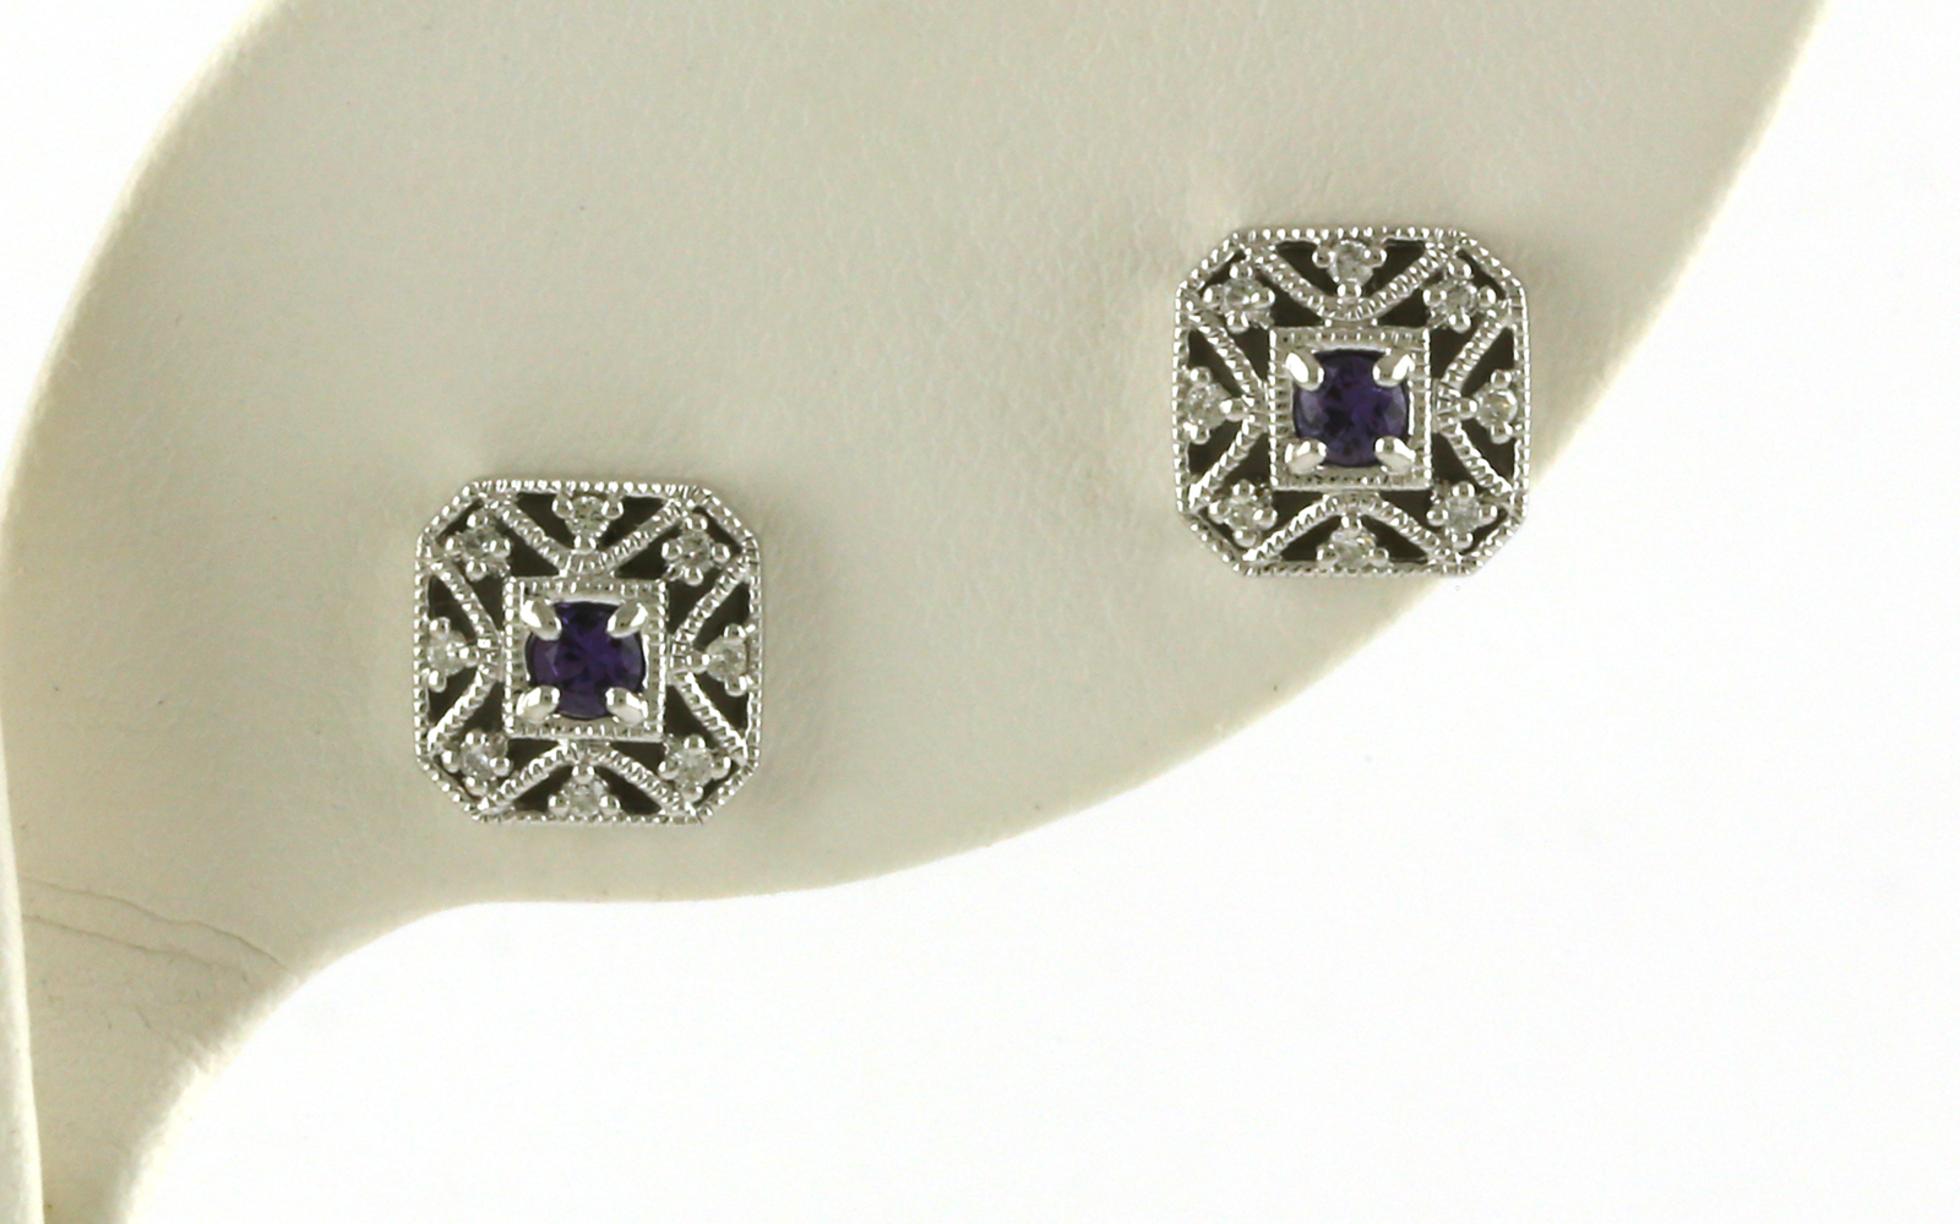 Vintage-style Filigree Huckleberry Yogo Sapphire and Diamond Earrings in White Gold (0.22cts TWT)